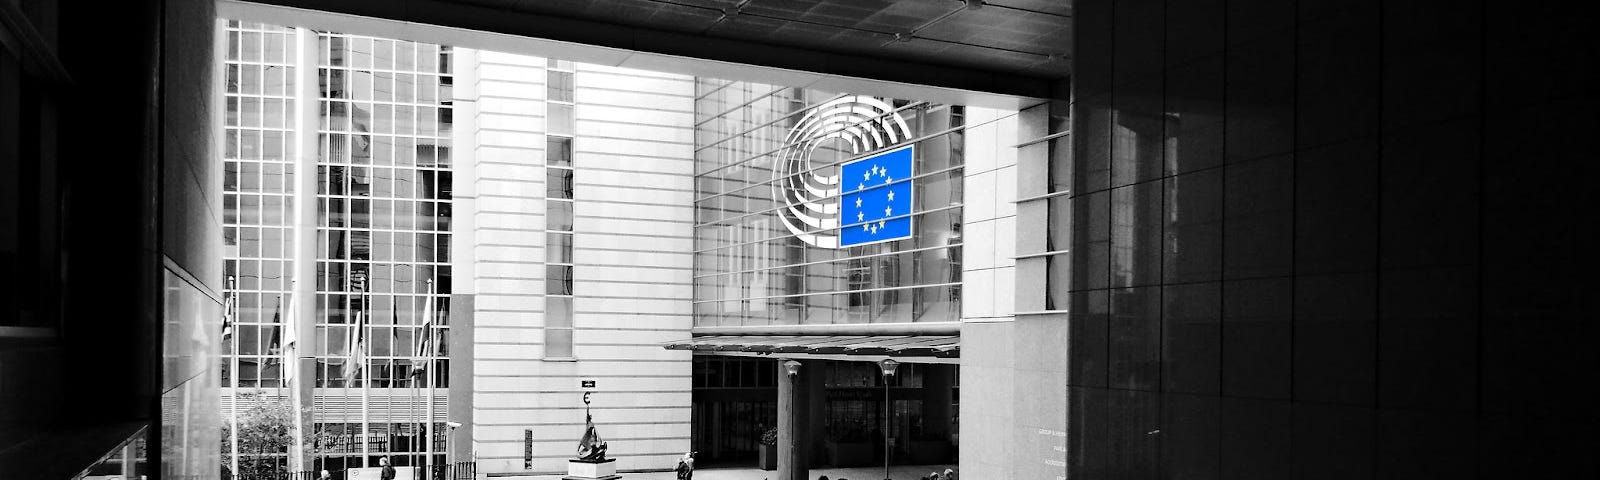 Black and white image of the entrance to the European Parliament building with the European Union flag which is tho only item in colour.